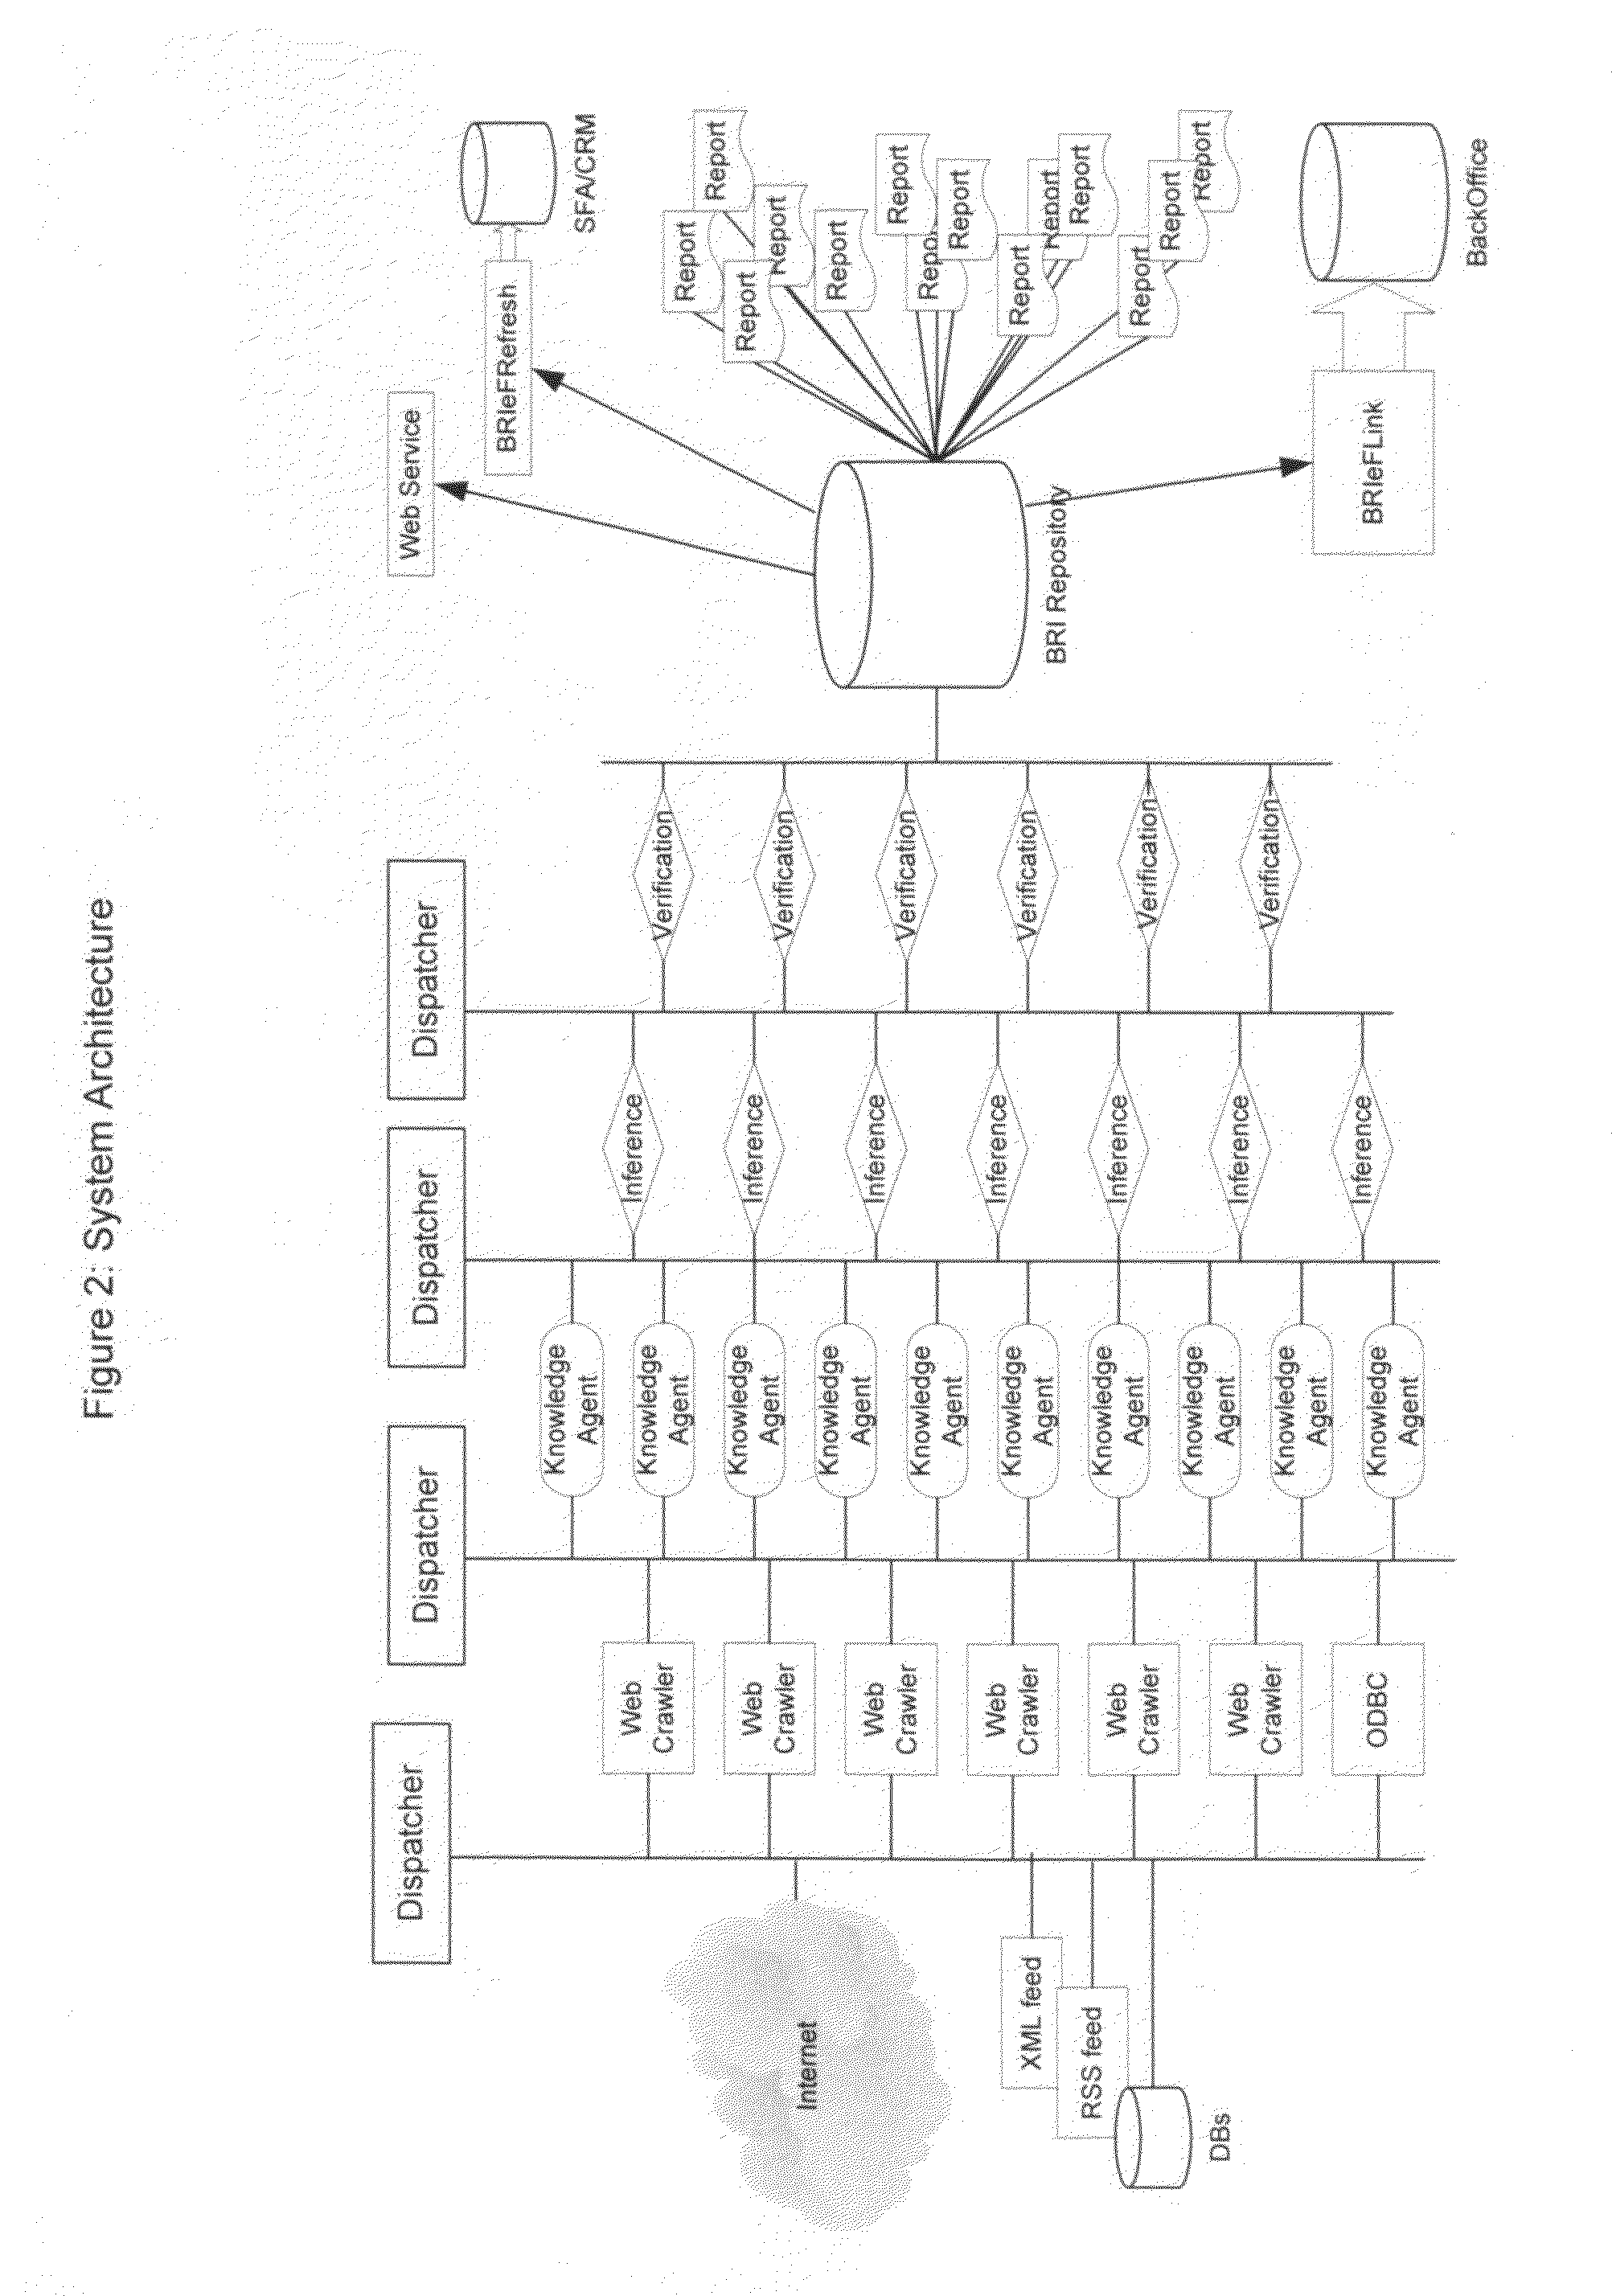 System and method for facts extraction and domain knowledge repository creation from unstructured and semi-structured documents